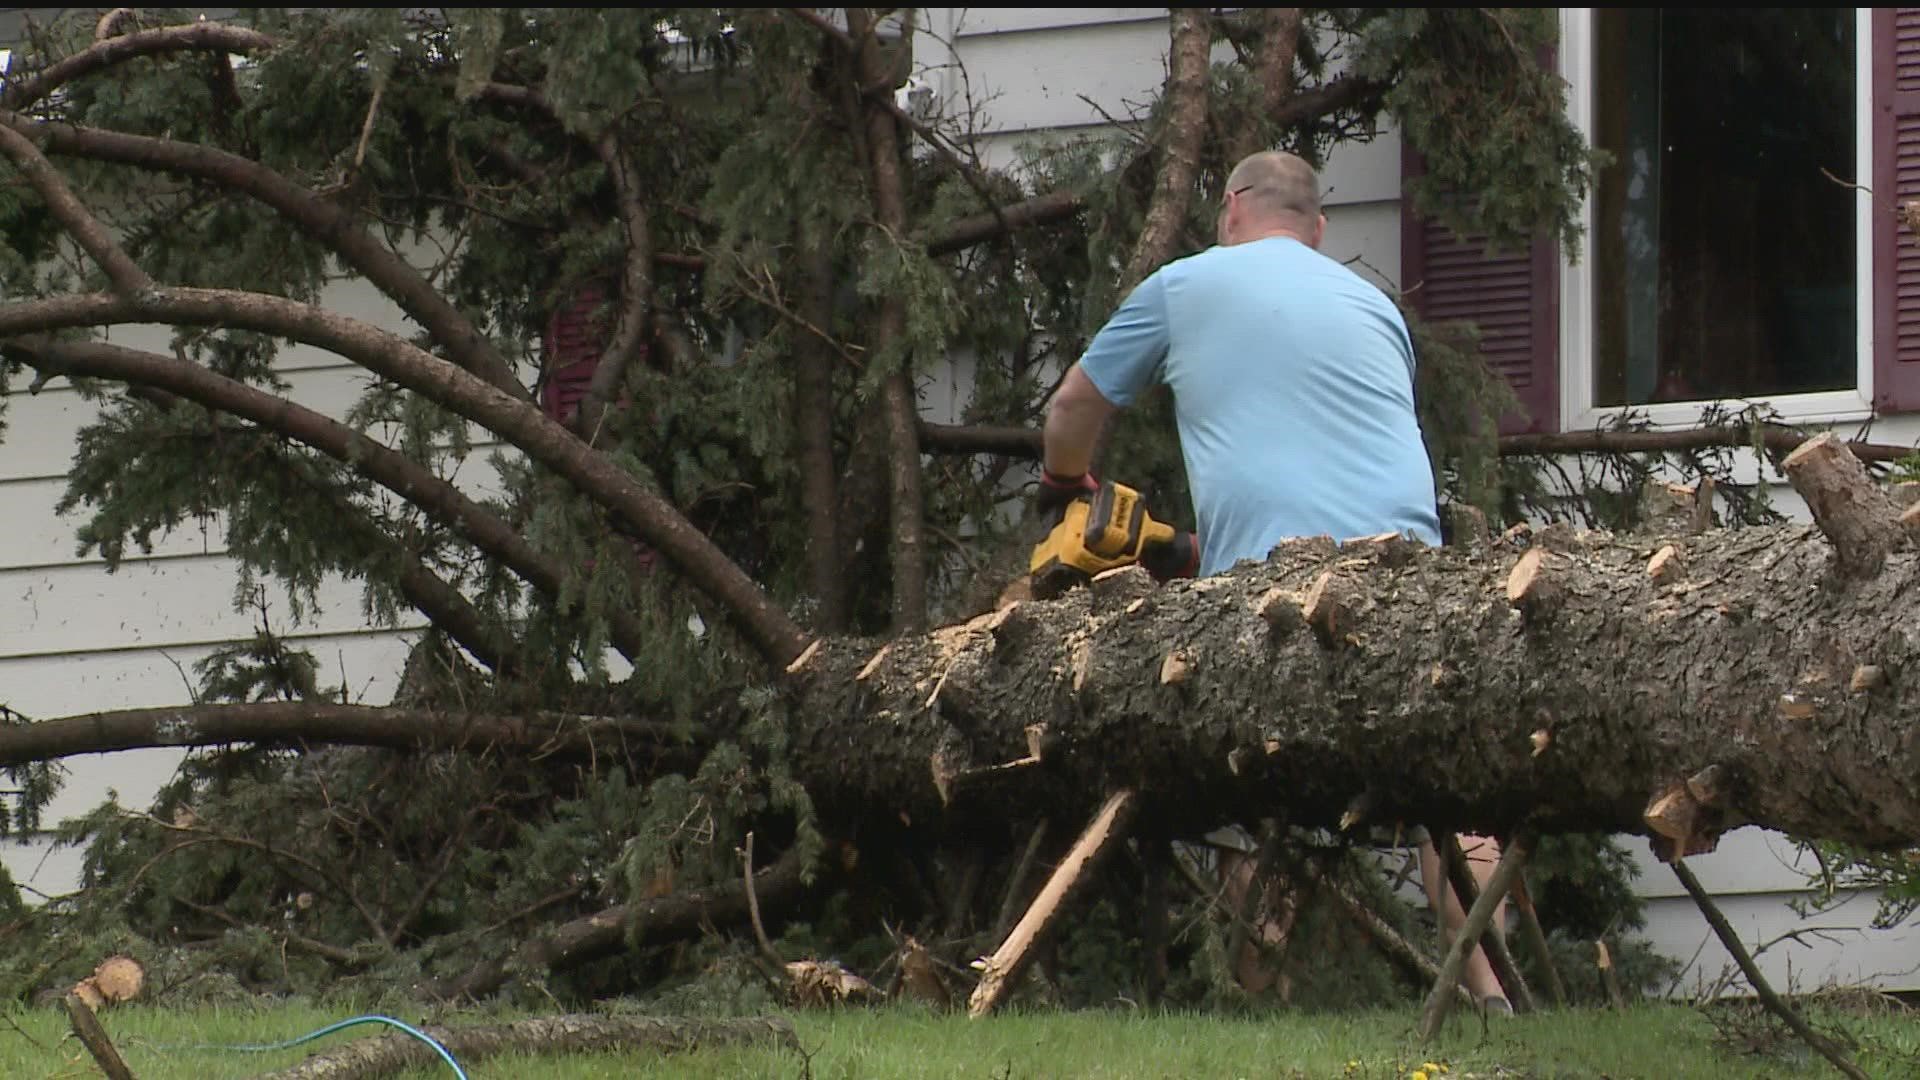 Experts say you should wait a few days before getting an estimate on downed trees - they can settle over time and potentially cause more damage.